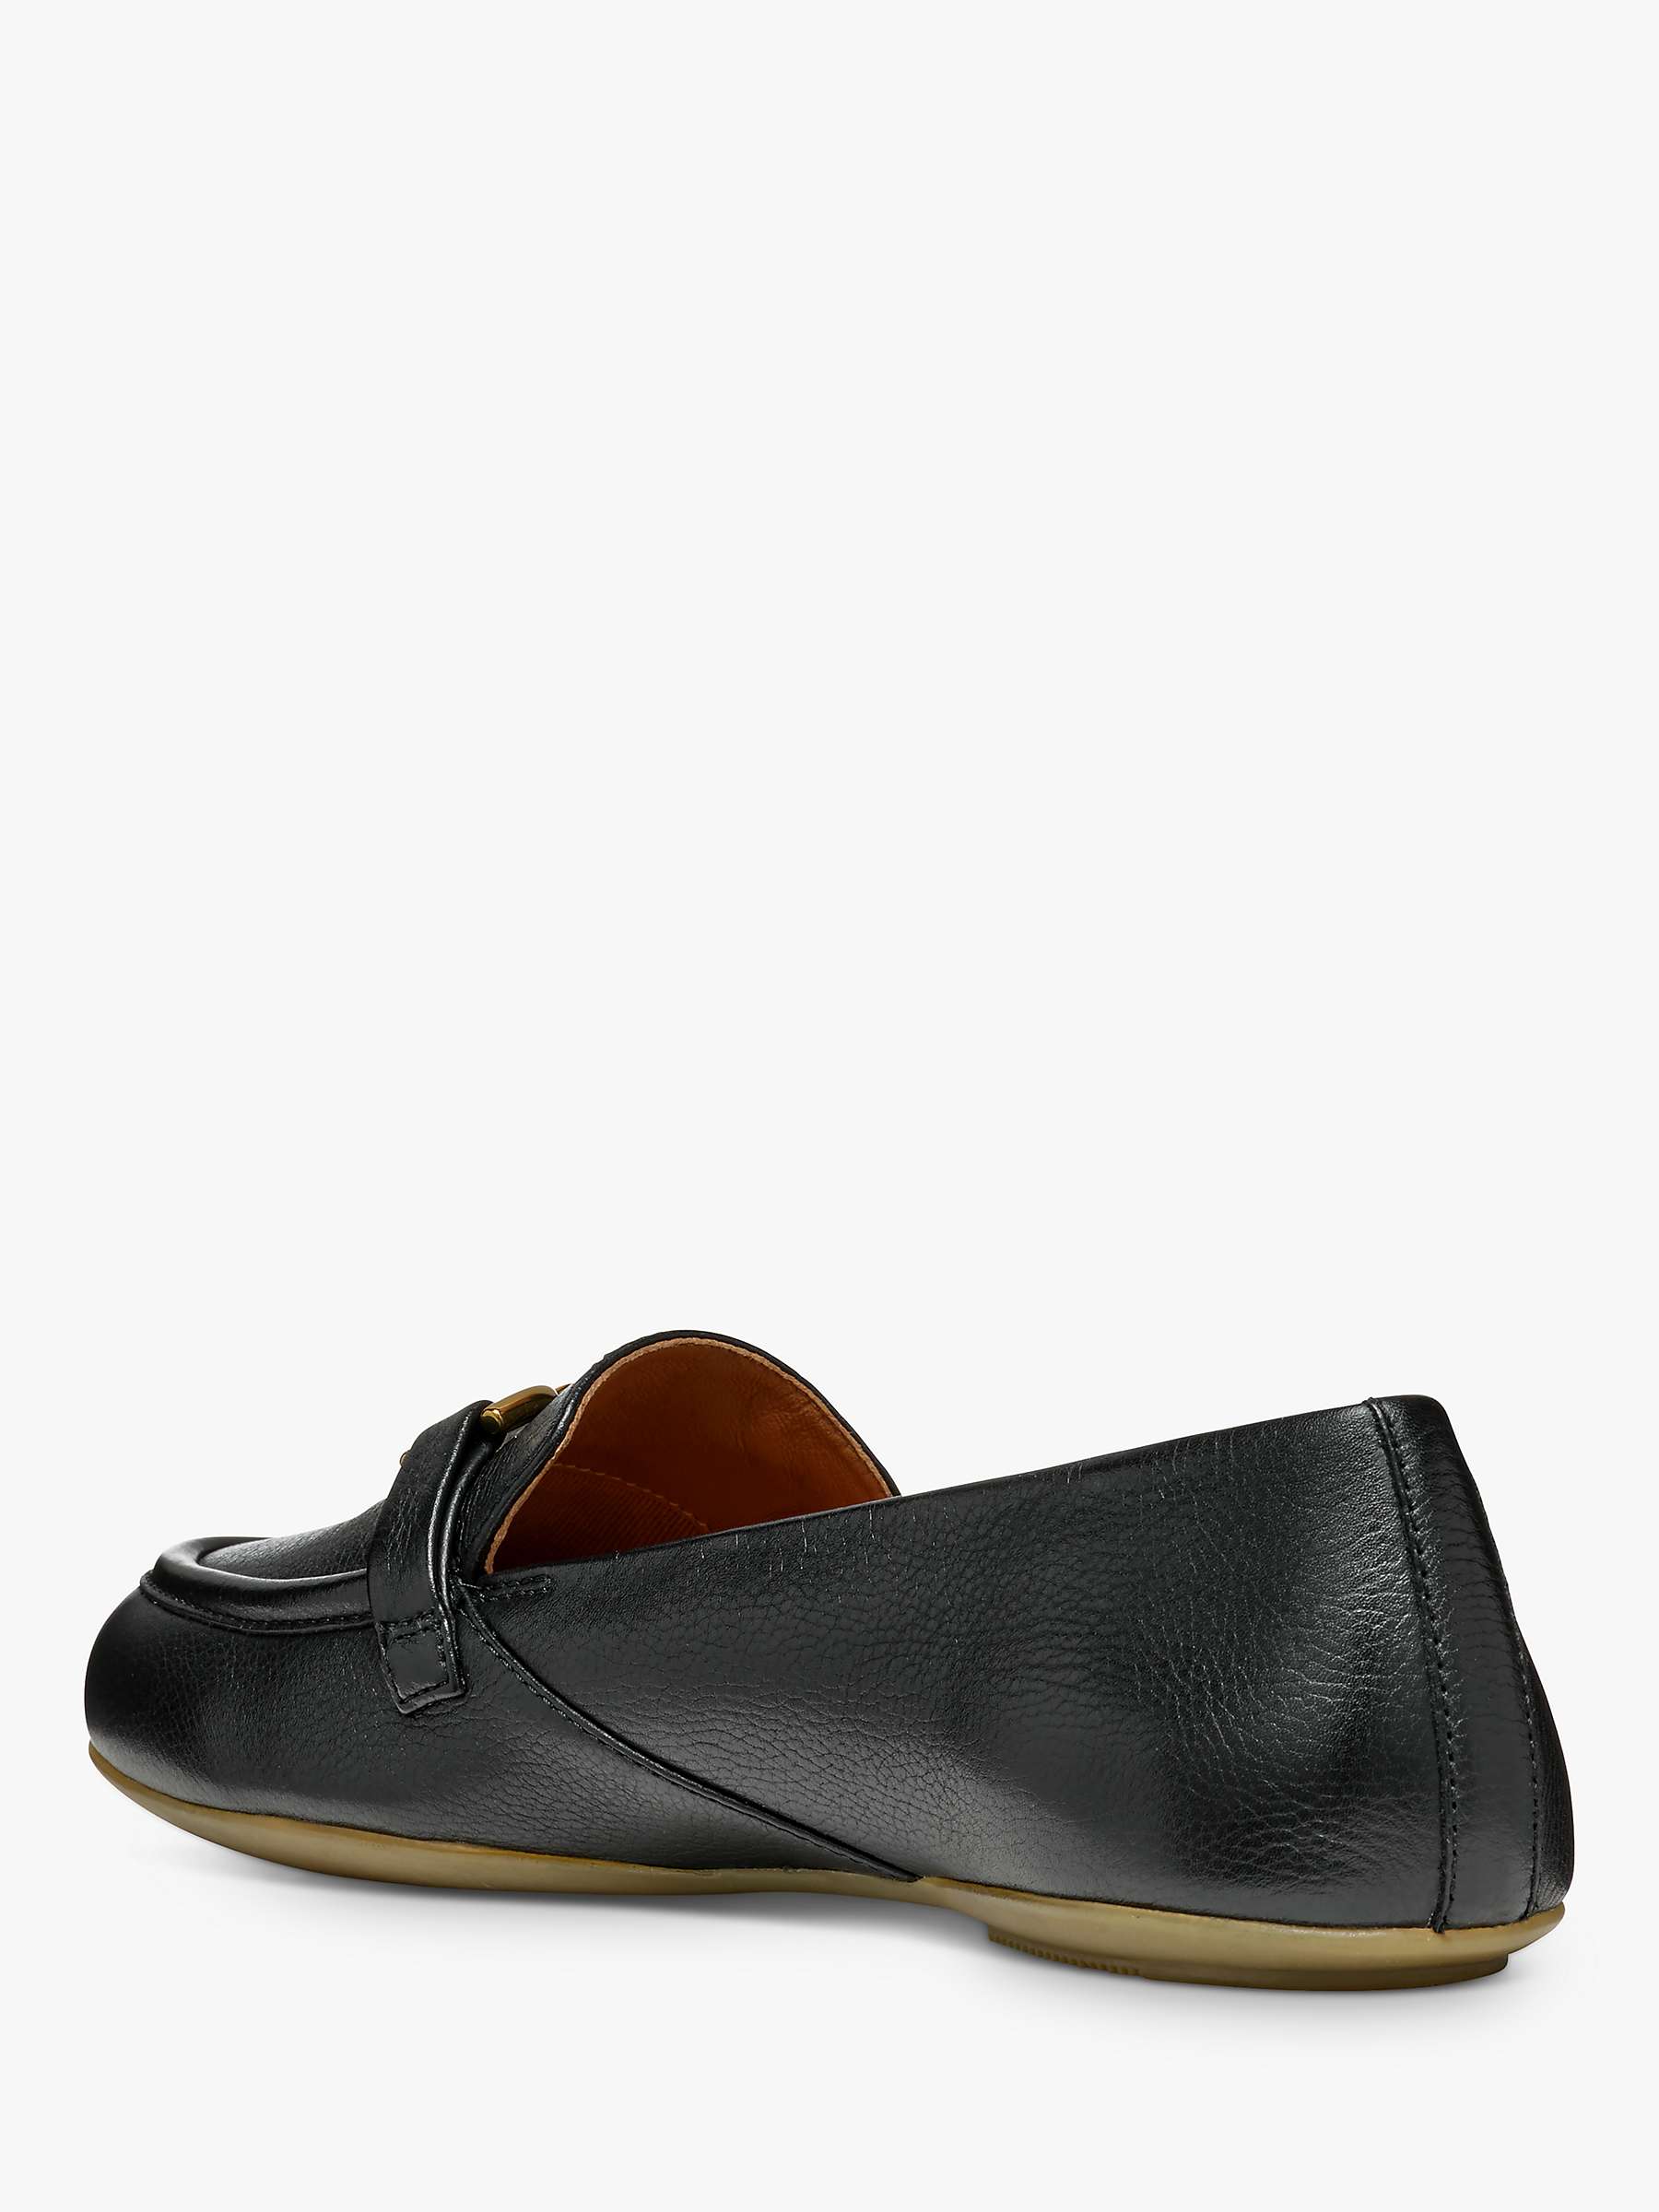 Buy Geox Palmaria Leather City Loafers, Black Online at johnlewis.com